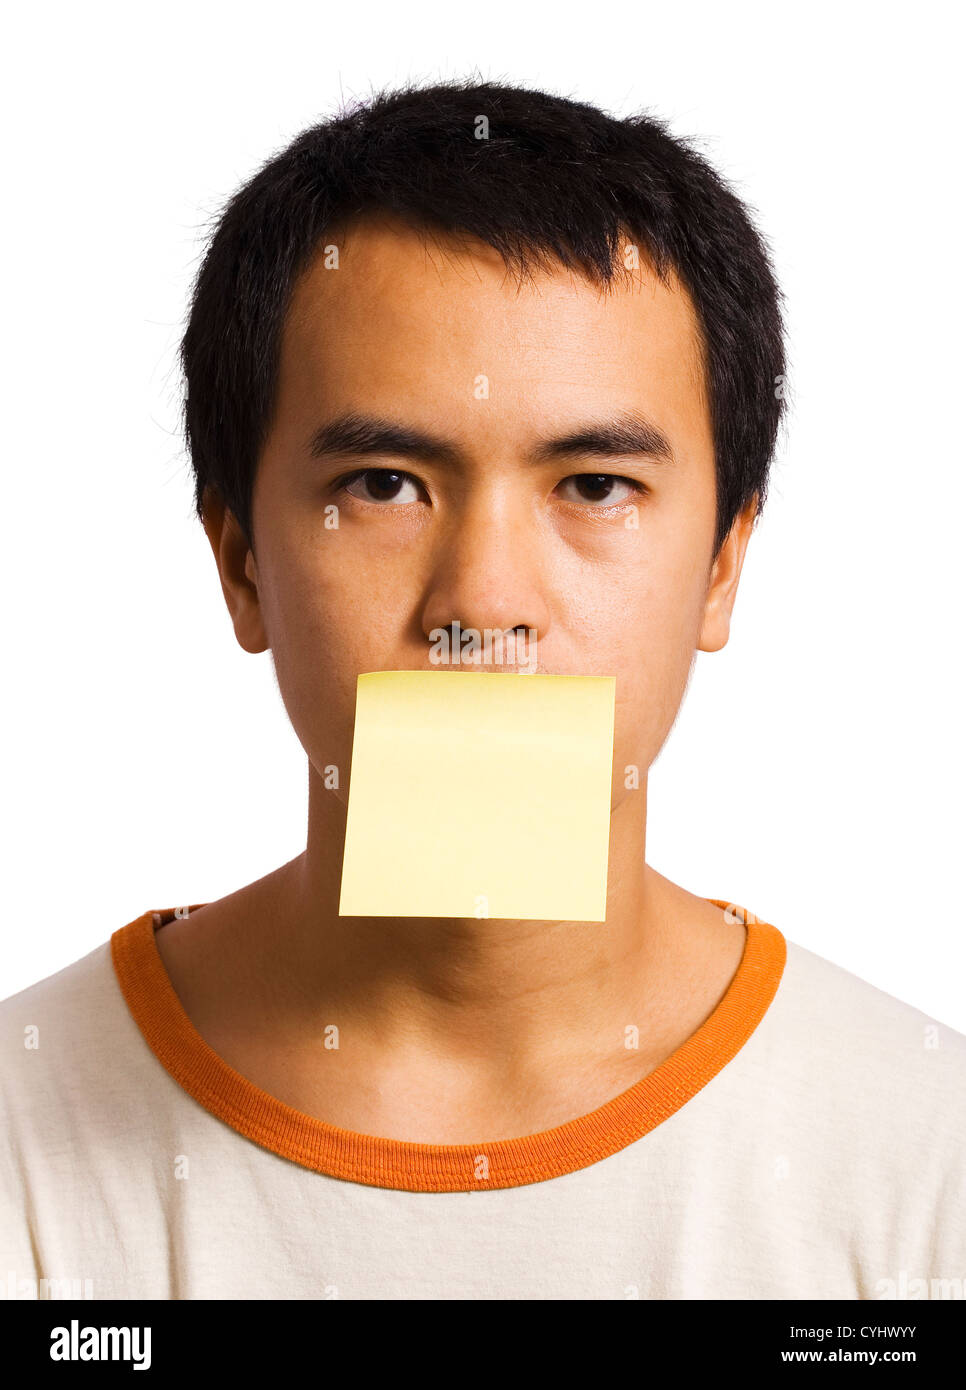 Sending A Message With A Post It Note On His Mouth Stock Photo